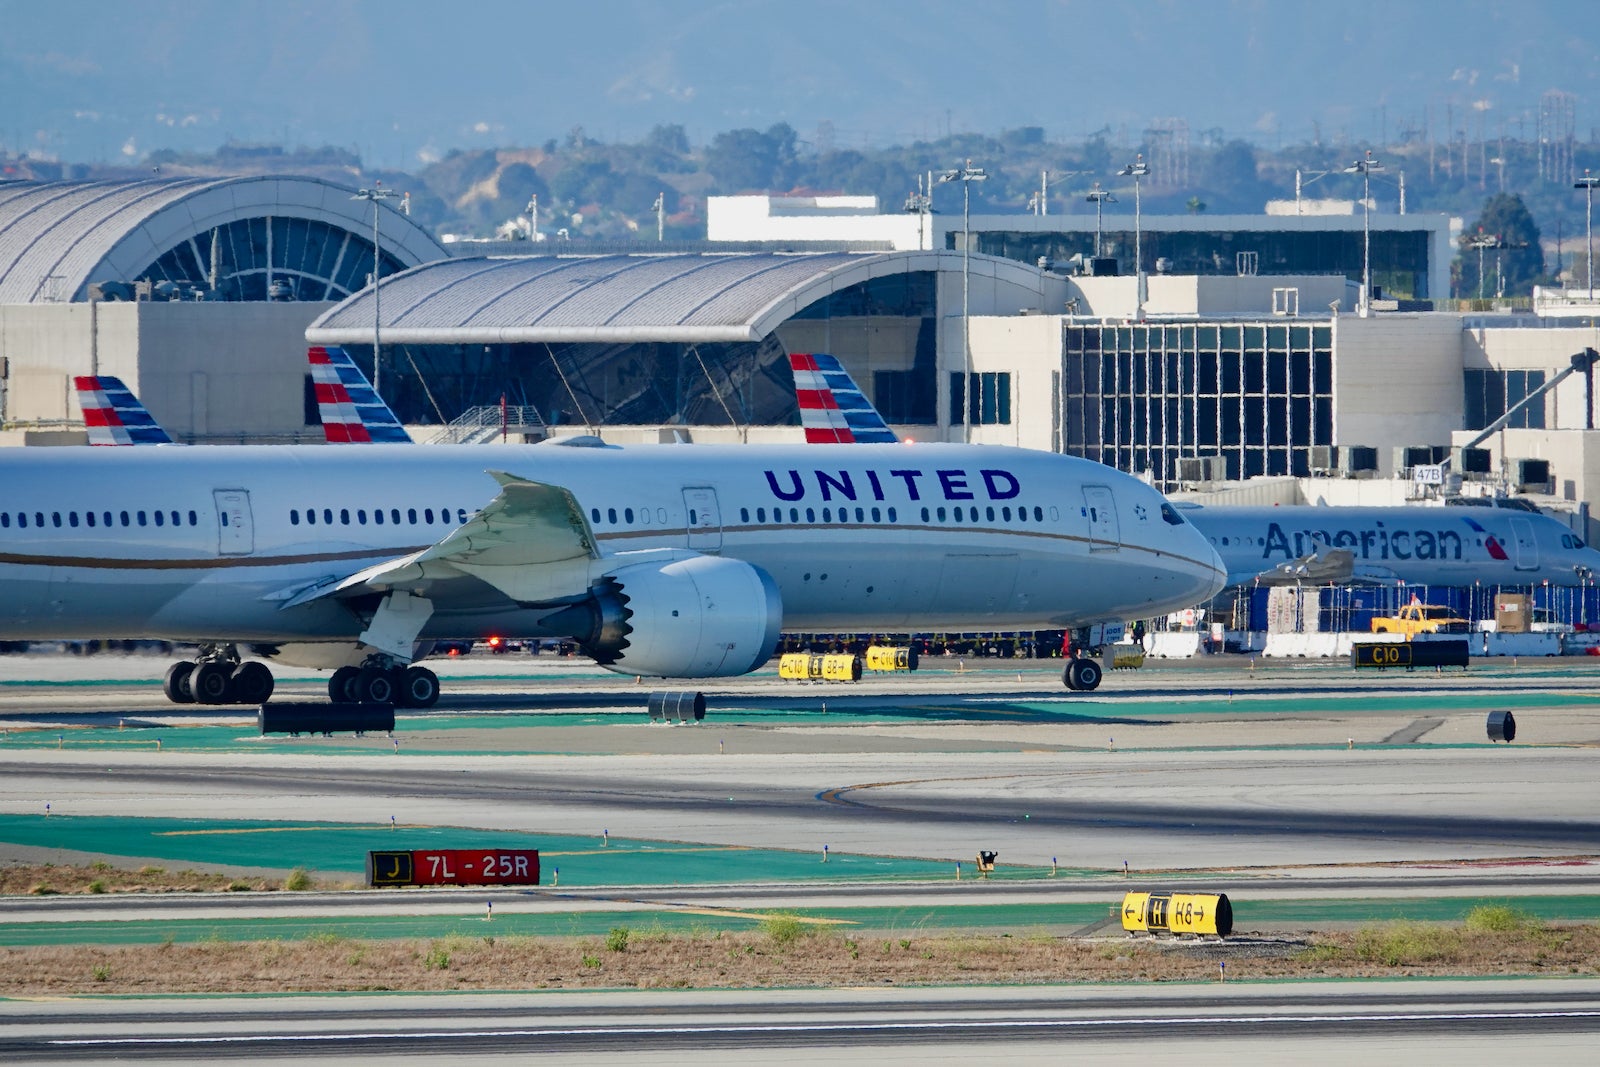 Deal alert: $88 round-trip domestic flights with United